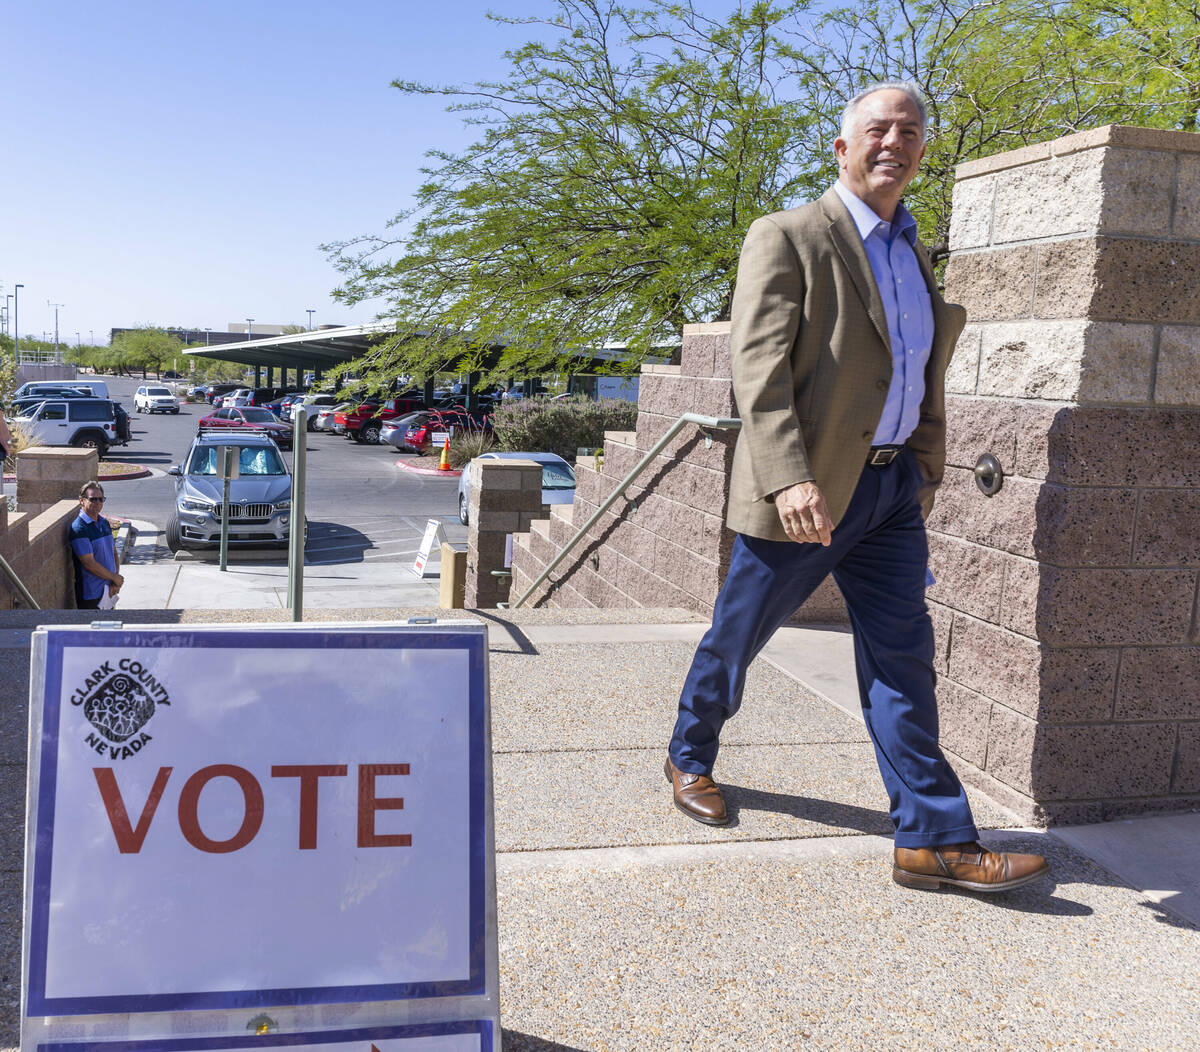 Sheriff Joe Lombardo arrives to cast his vote during the Nevada primary election at Veterans Me ...